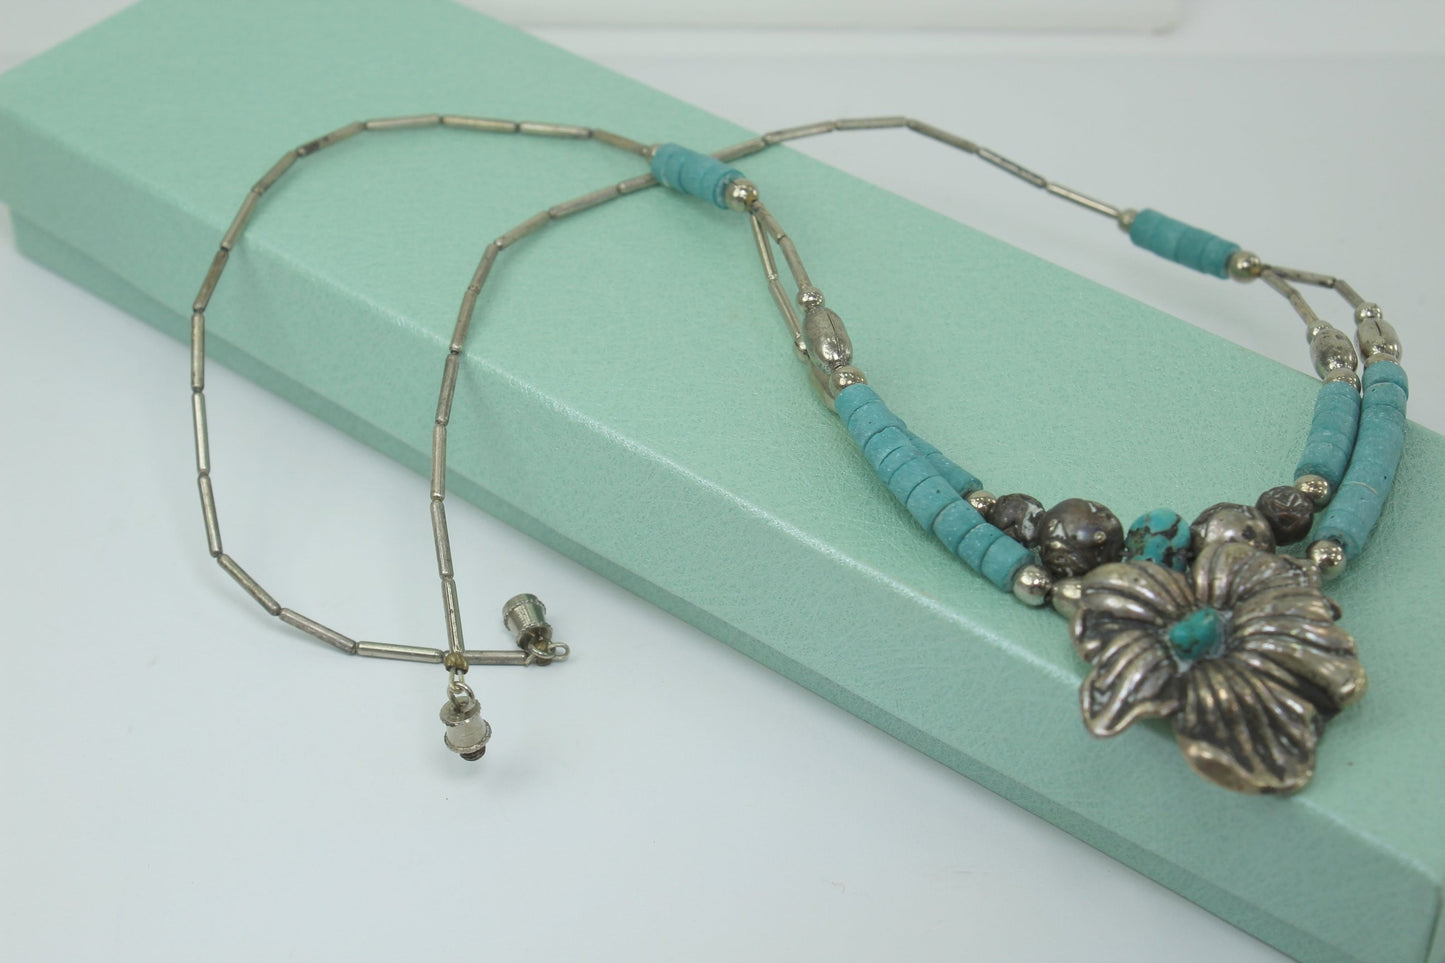 Southwest Necklace Turquoise Silver Beads Flower Focal 2 Strand unusual